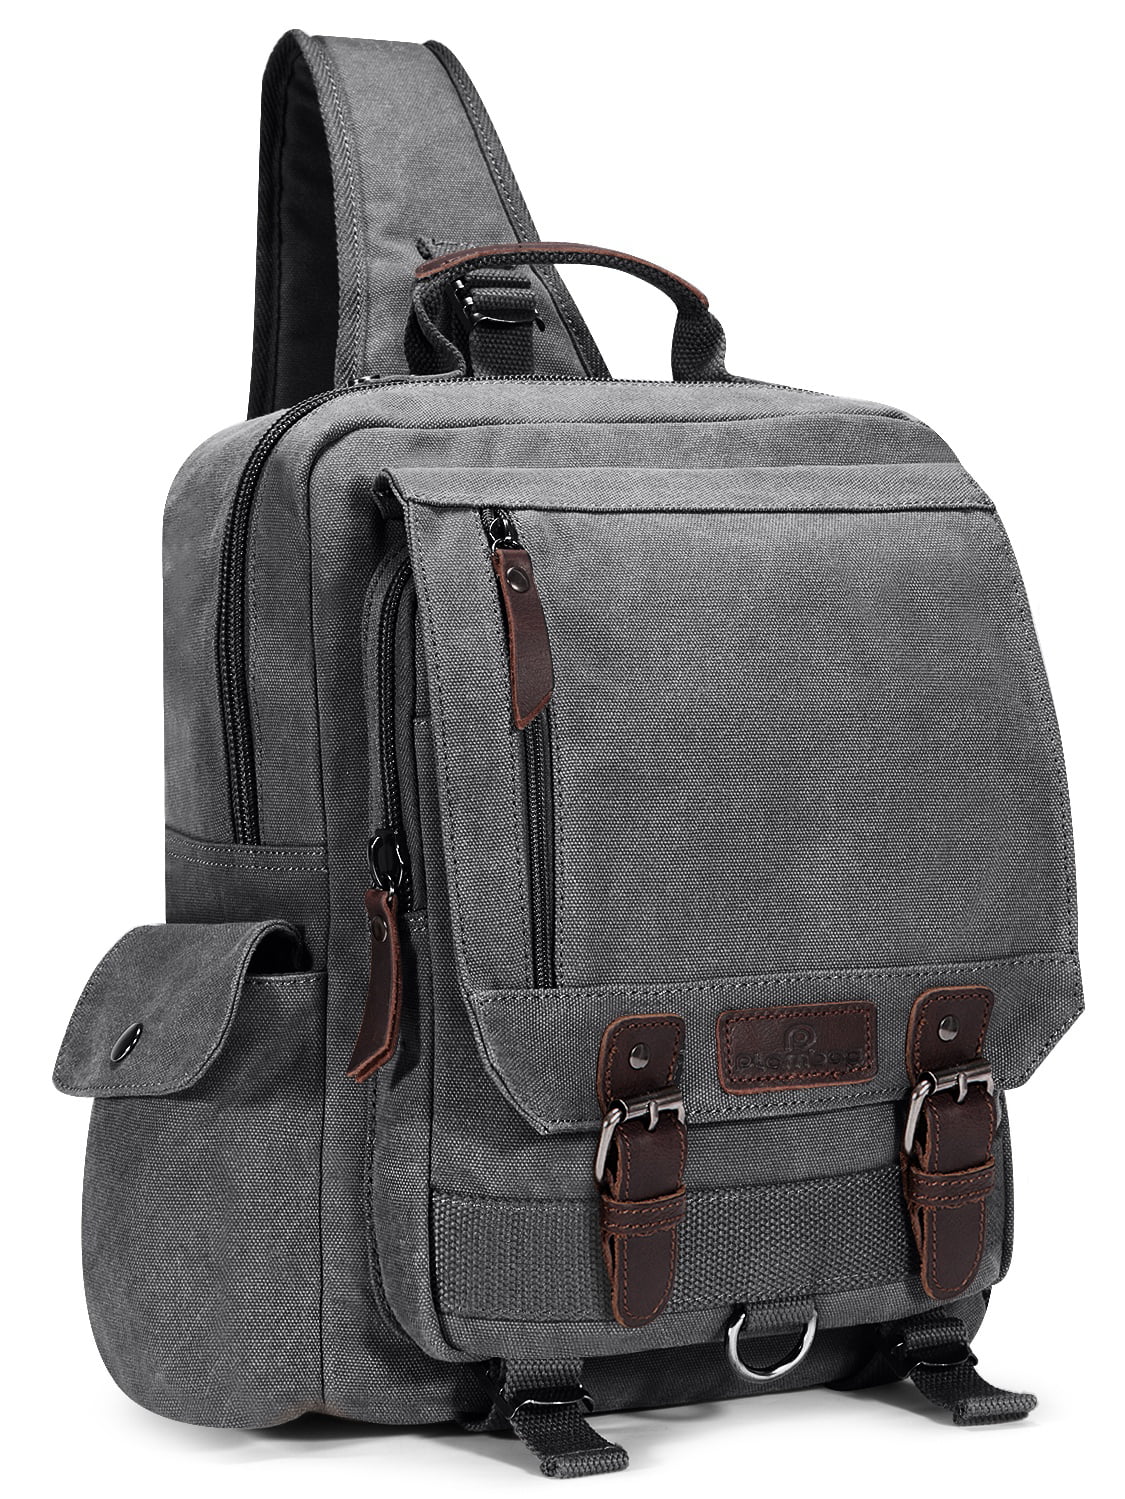 one strap backpack travel